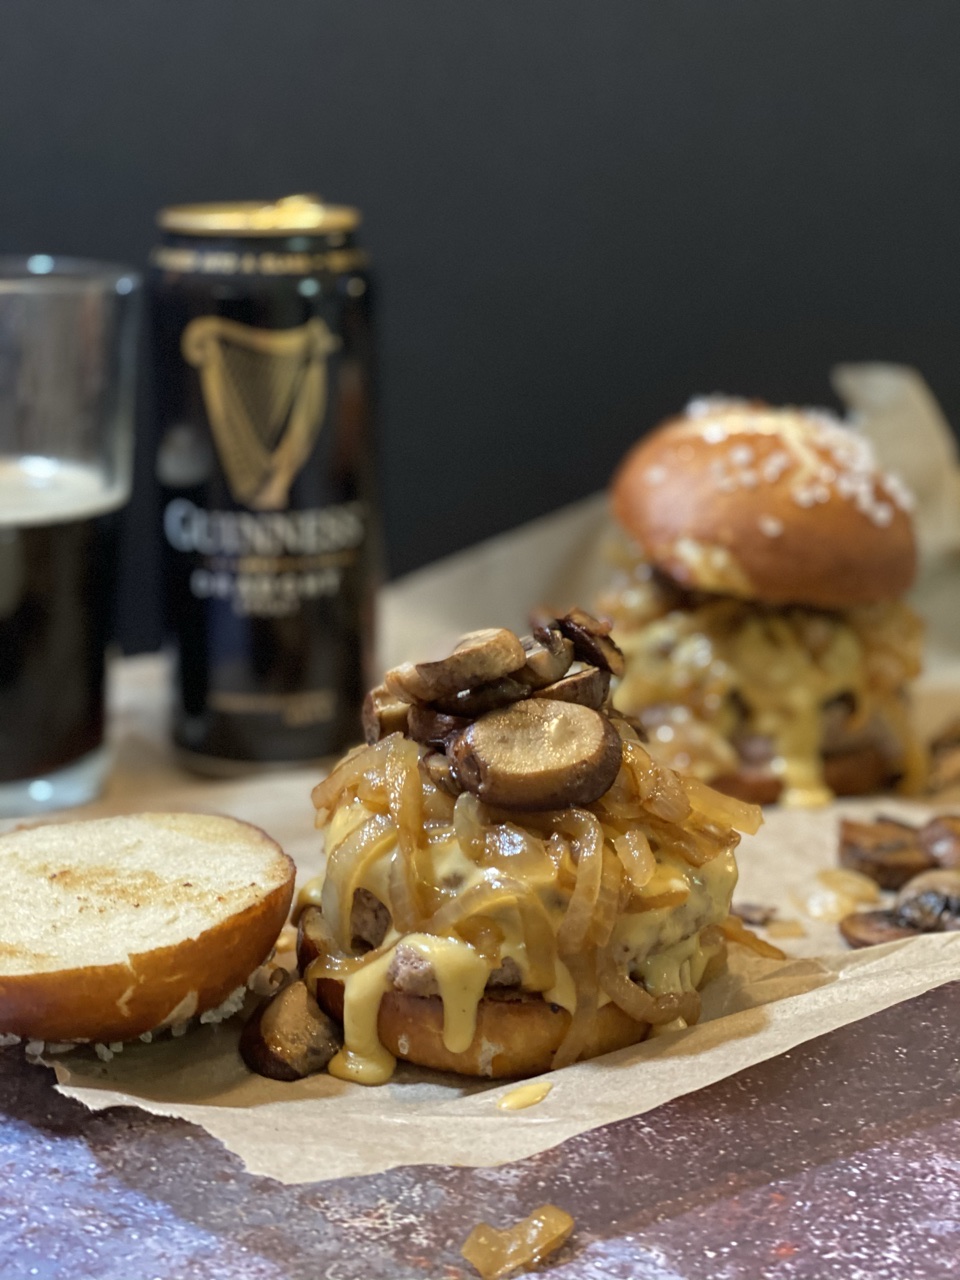 B6372C64 0072 4A60 92EF 8064EC4A4B56 - Guinness Blue Cheese Burgers with Guinness Cheddar & Caramelized Onions & Mushrooms